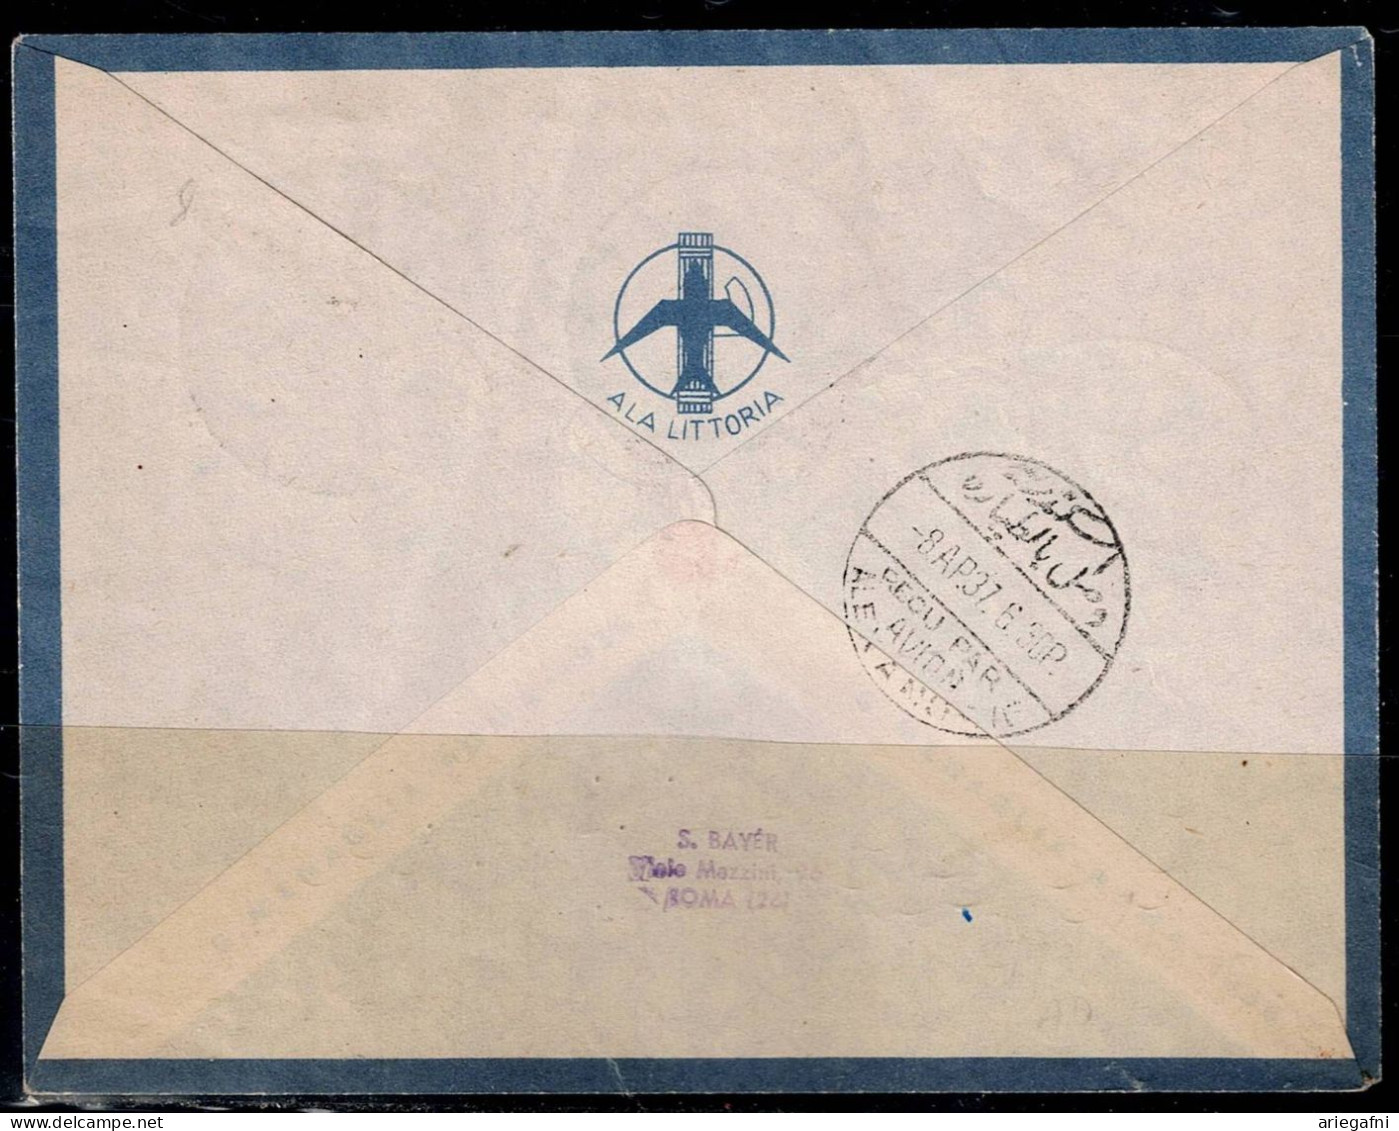 ISRAEL 1937 COVER FLYING BY AIR MAIL IN7/4/37 FROM ROMA VIA HAIFA TO ALESSANDRIA VF!! - Luftpost